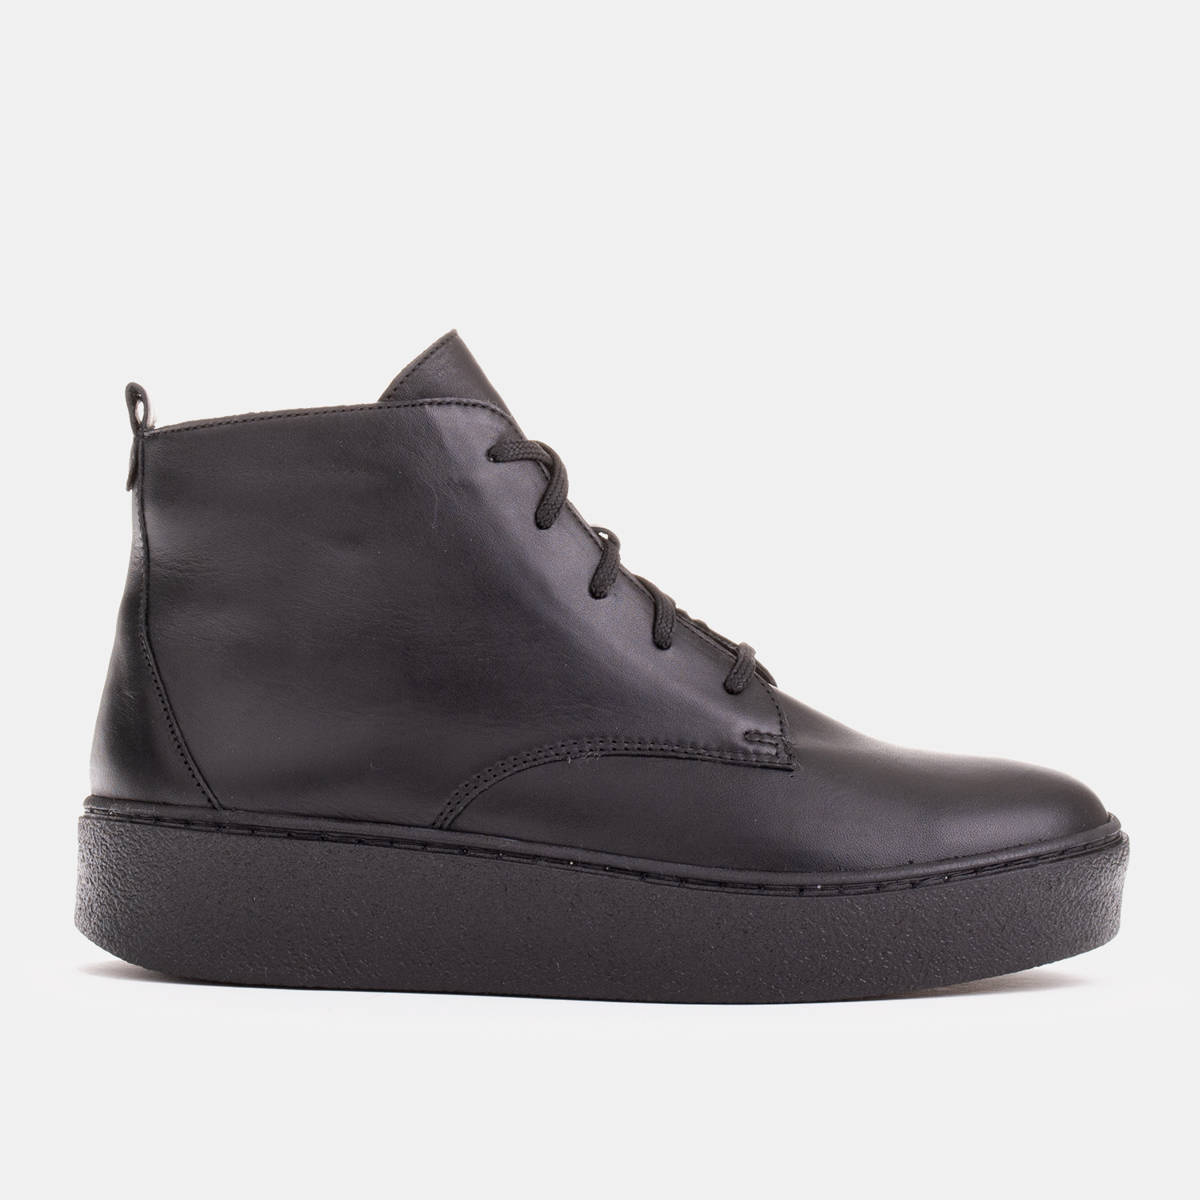 Low lace-up boots with soft leather - MarcoShoes.eu Online Shop